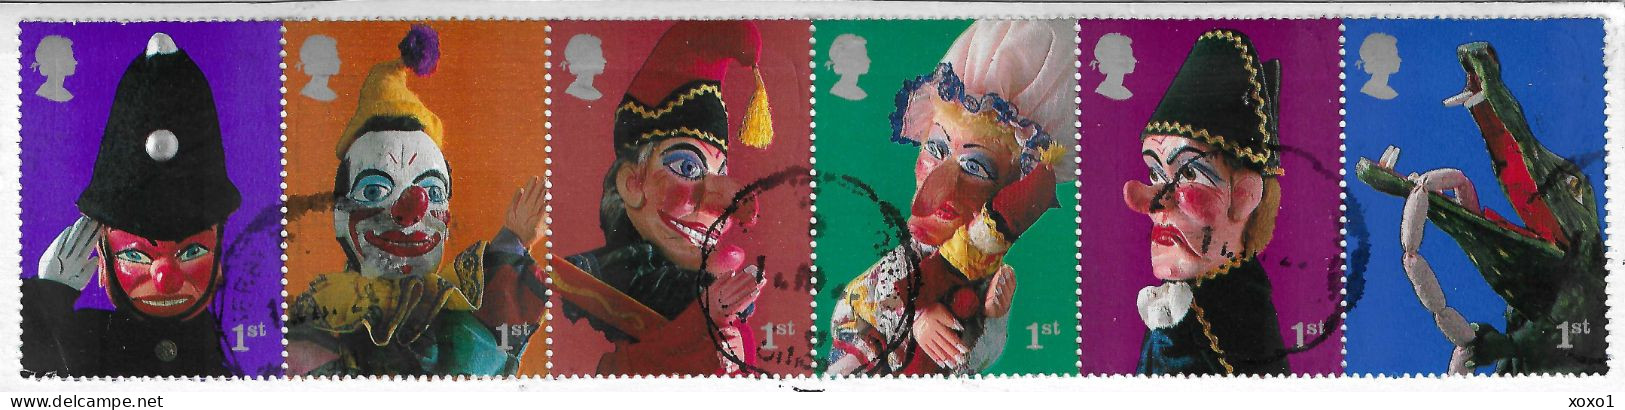 Great Britain 2001 MiNr. 1946 - 1951 Großbritannien Hand Puppet Theater: Punch And Judy Childhood Dolls 6v Used 7.50 € - Bambole